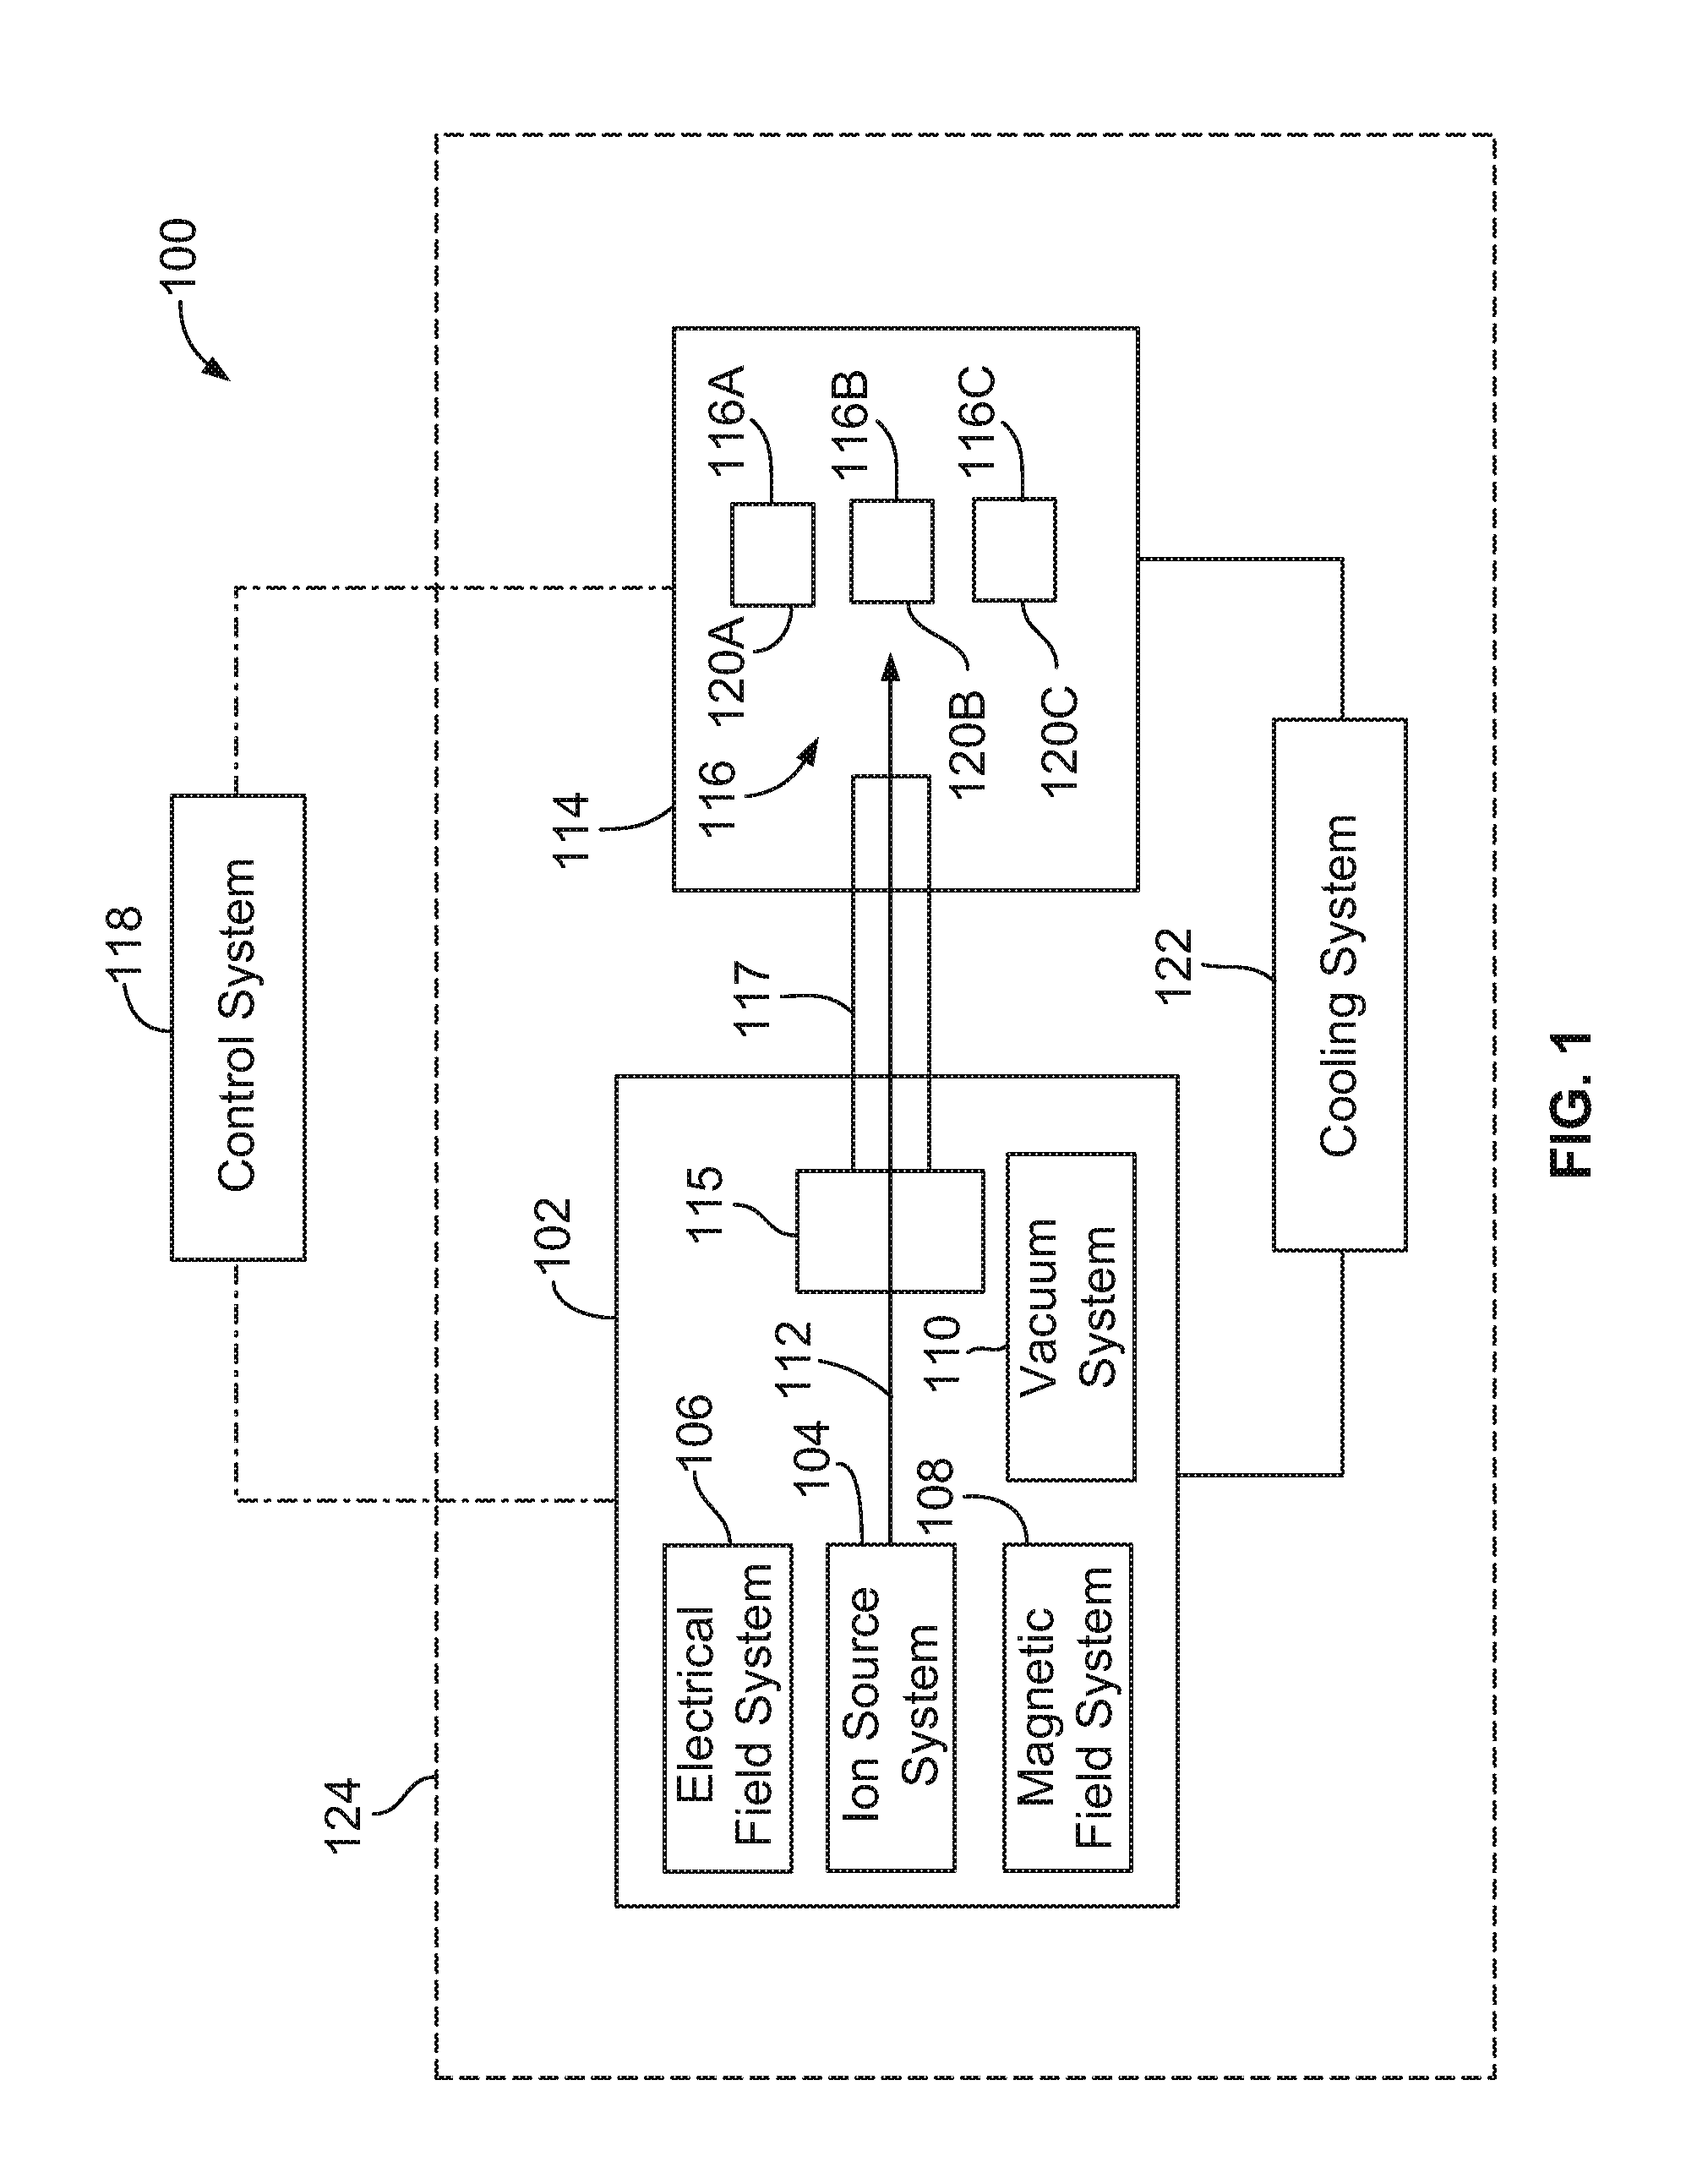 Isotope production system with separated shielding